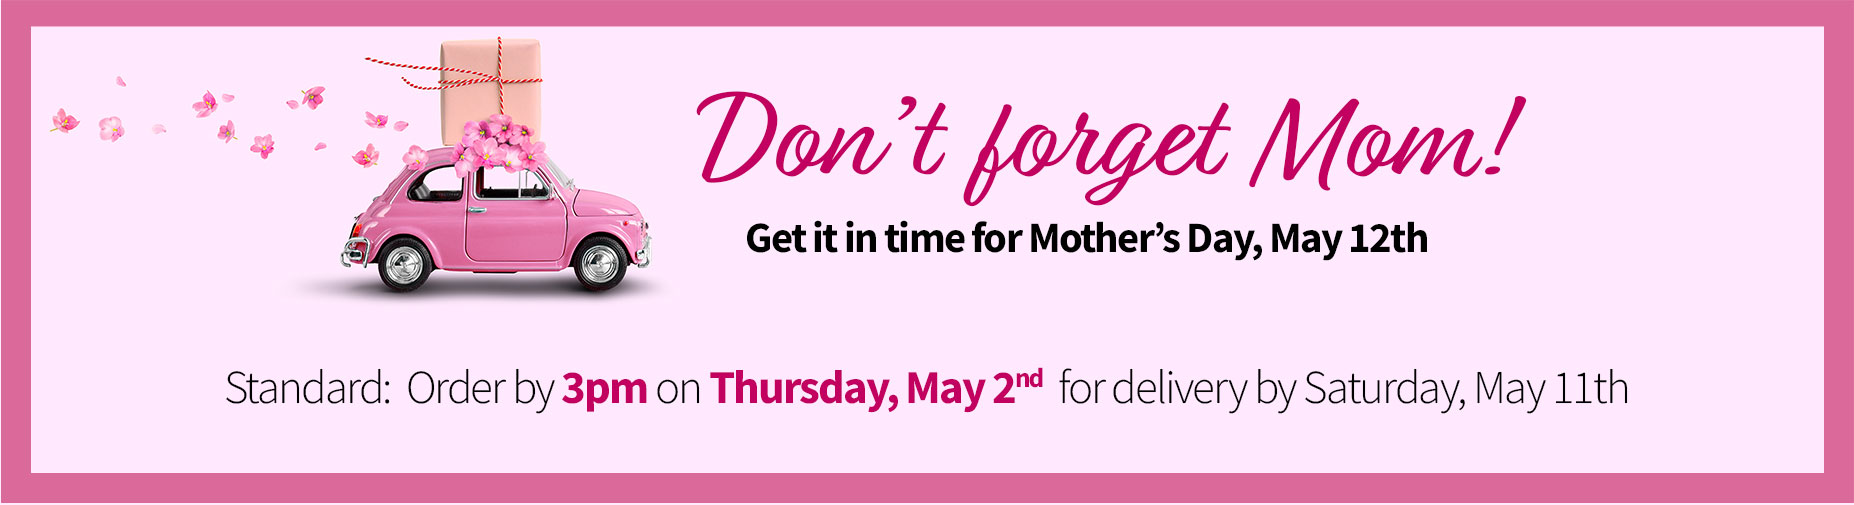 Don't forget about mom. Get it in time for Mother's day, May 12th.